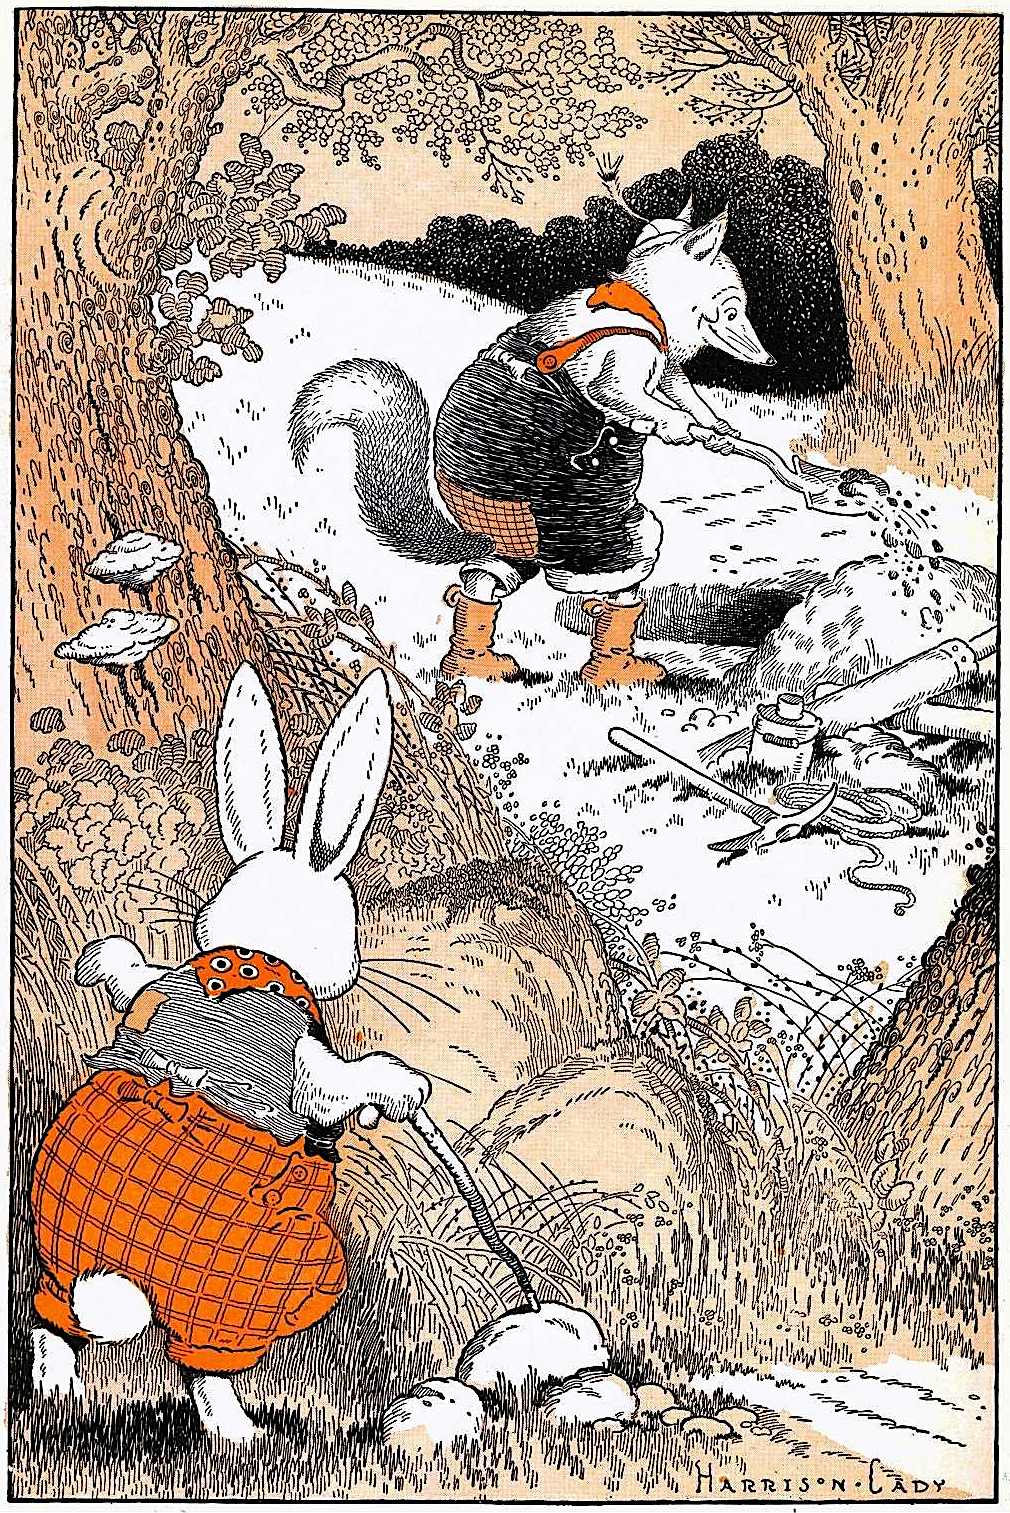 a Harrison Cady children's book color illustration, a fox digging a hole